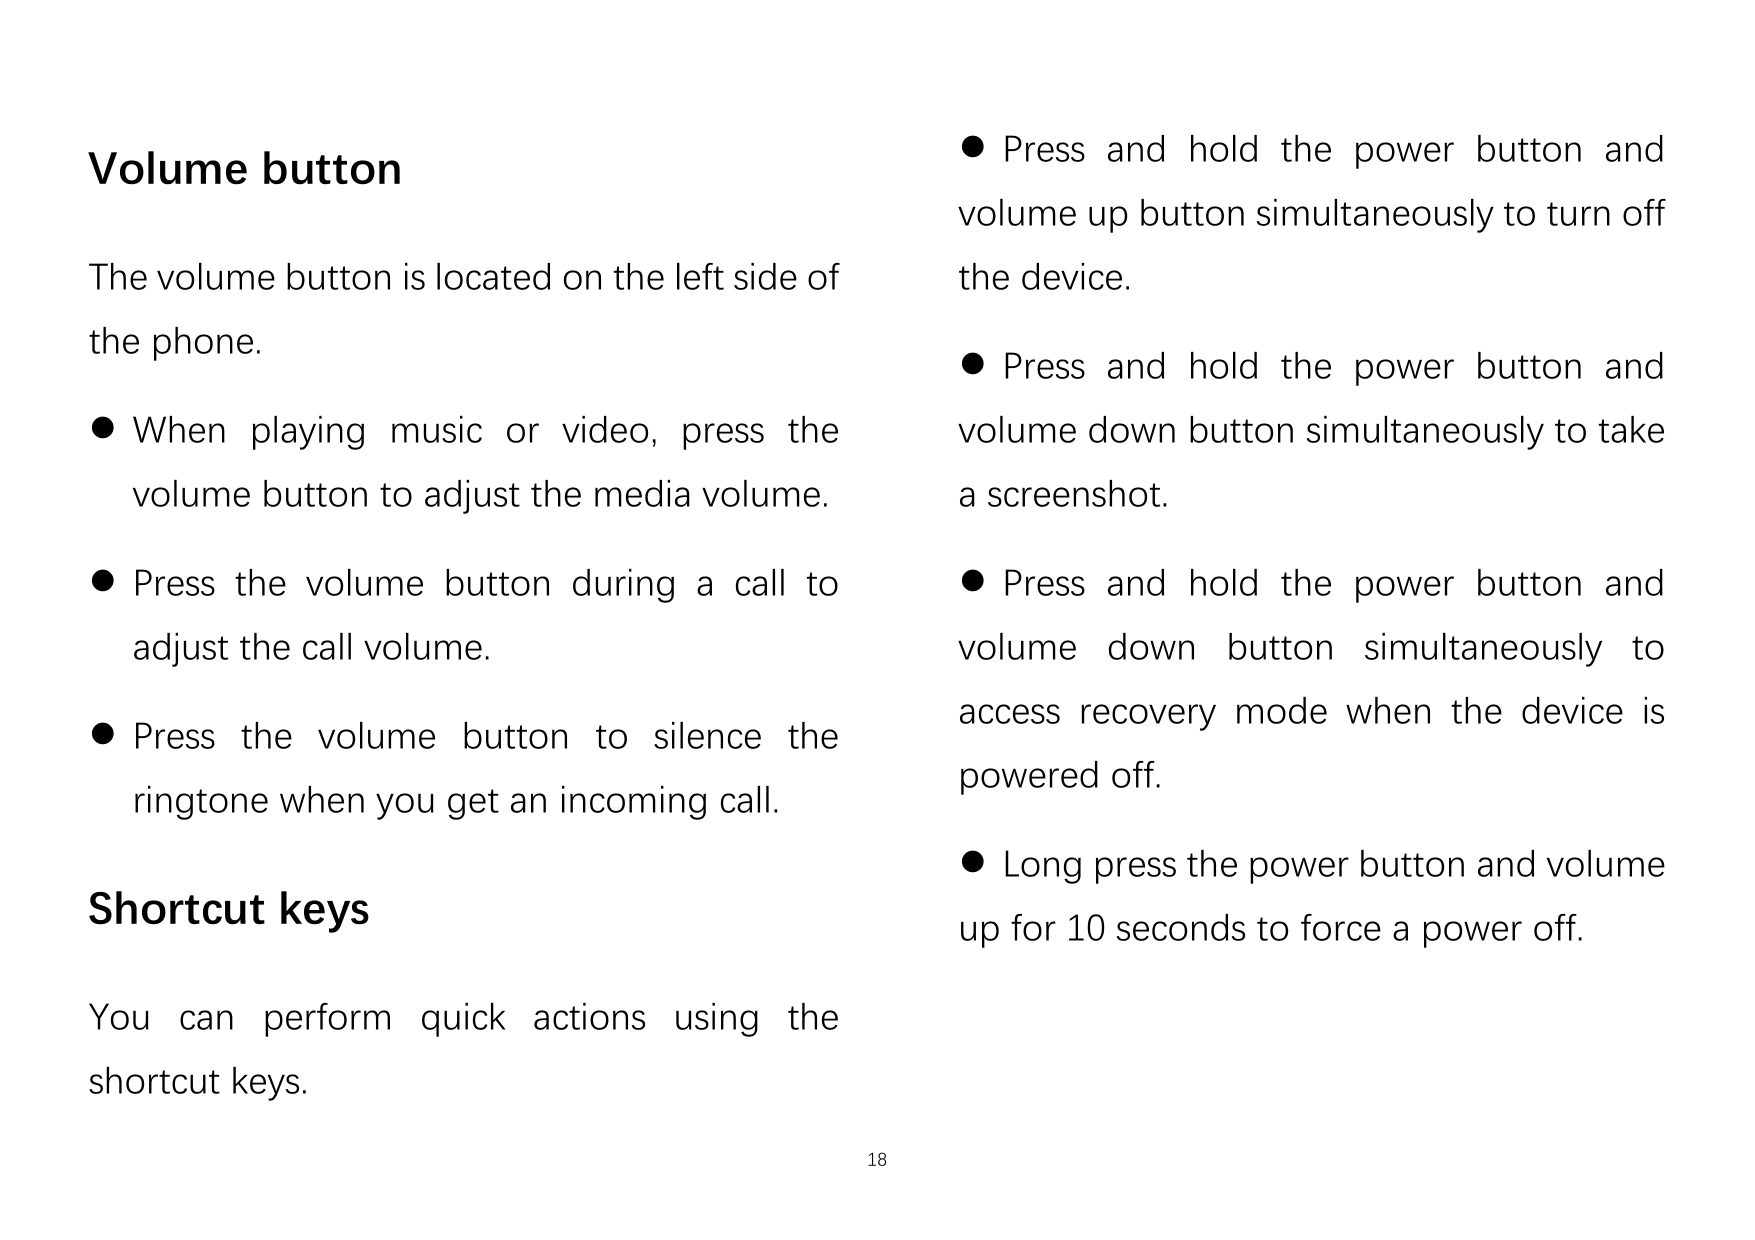 ⚫ Press and hold the power button andVolume buttonvolume up button simultaneously to turn offThe volume button is located on the